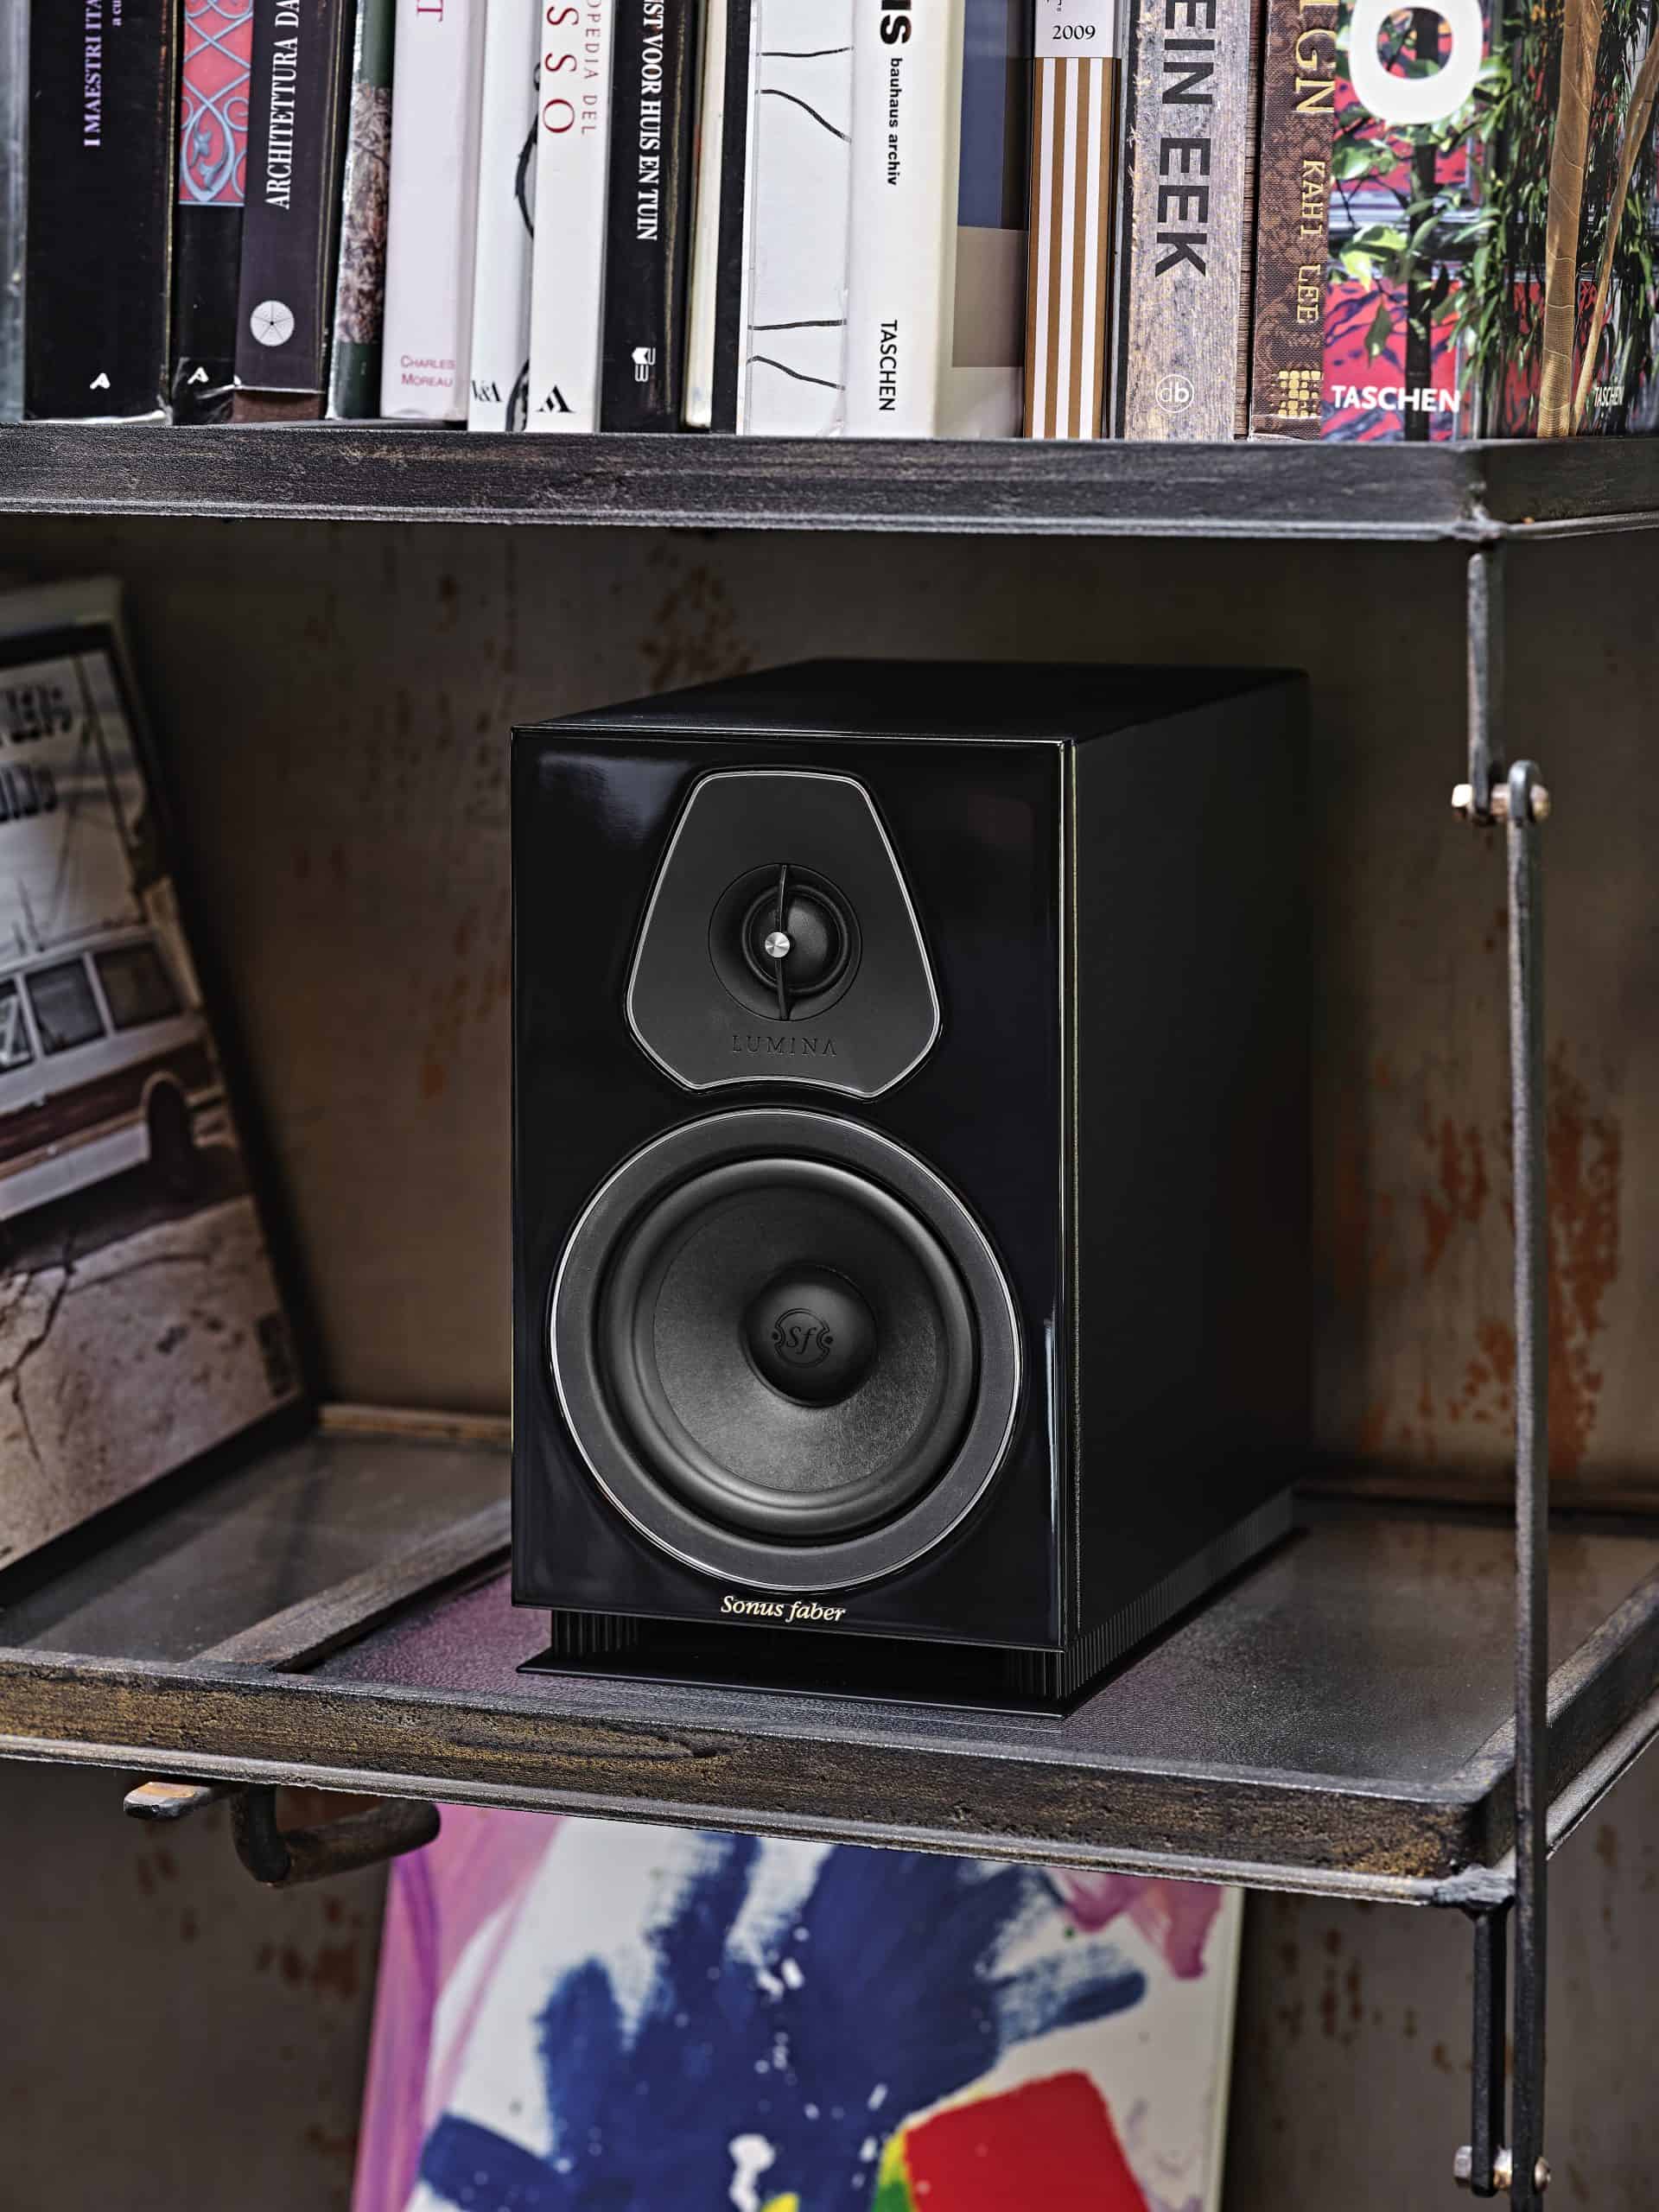 Sonus Faber's New Lumina Speakers Offer Ultra High-End Sound At an